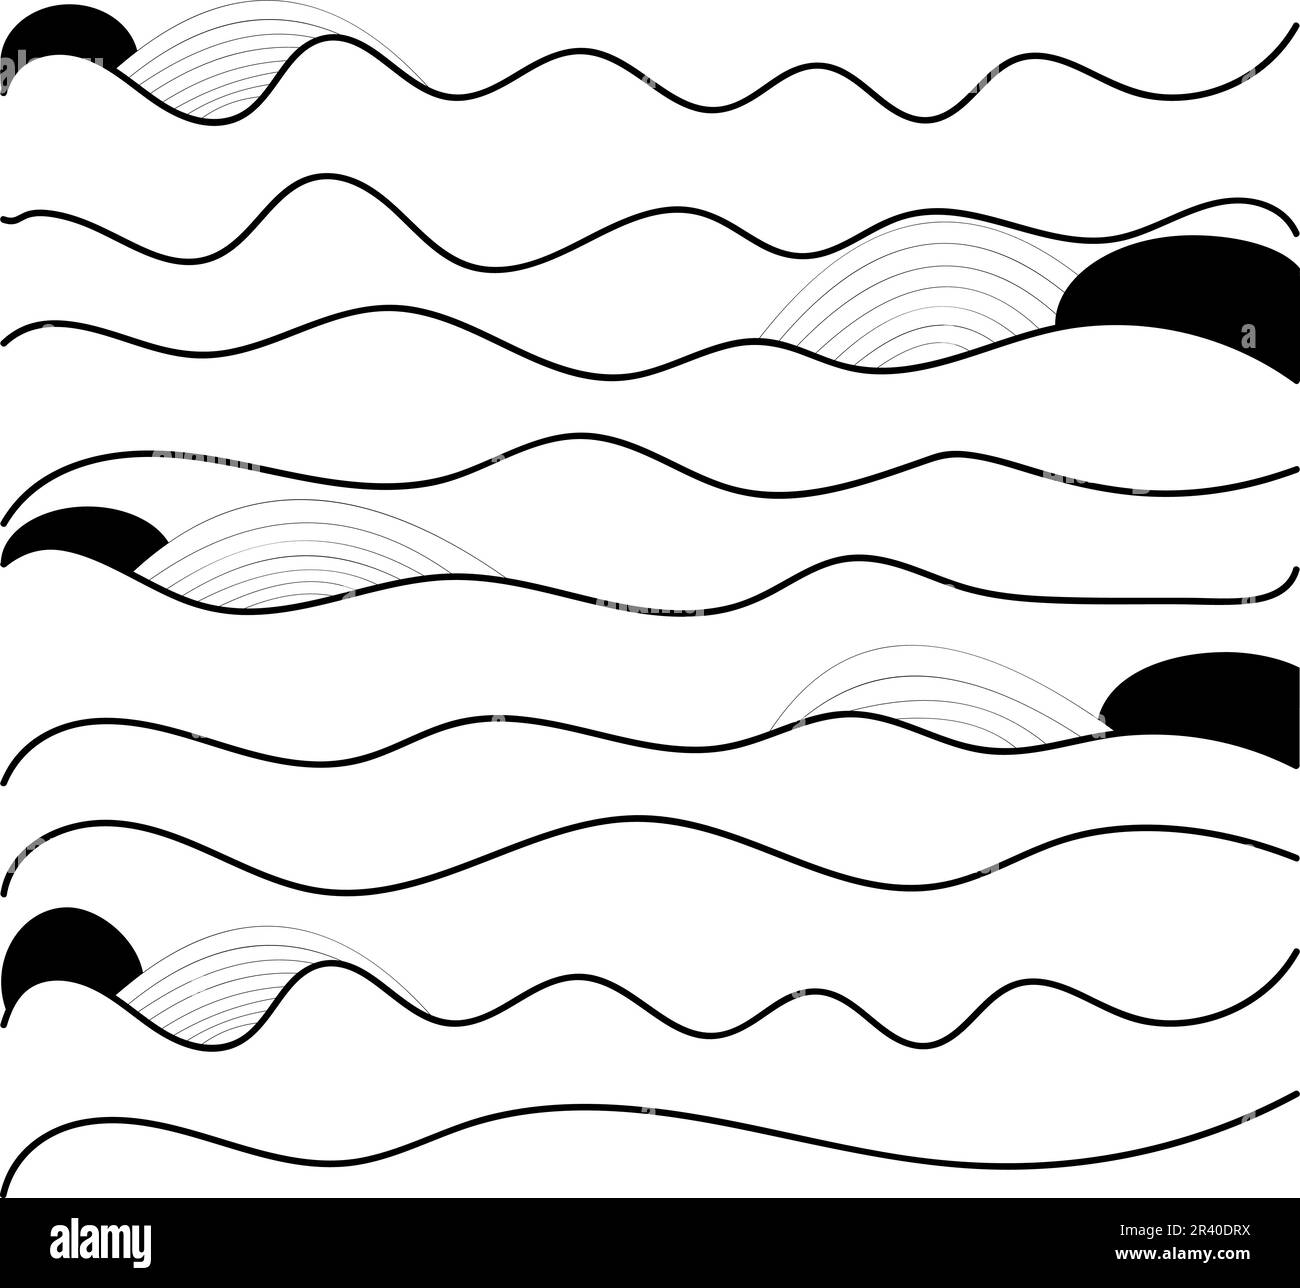 Abstract background, poster, banner. Composition of smooth dynamic waves, lines, striped shapes. Trendy design. Vector monochrome illustration. Stock Vector